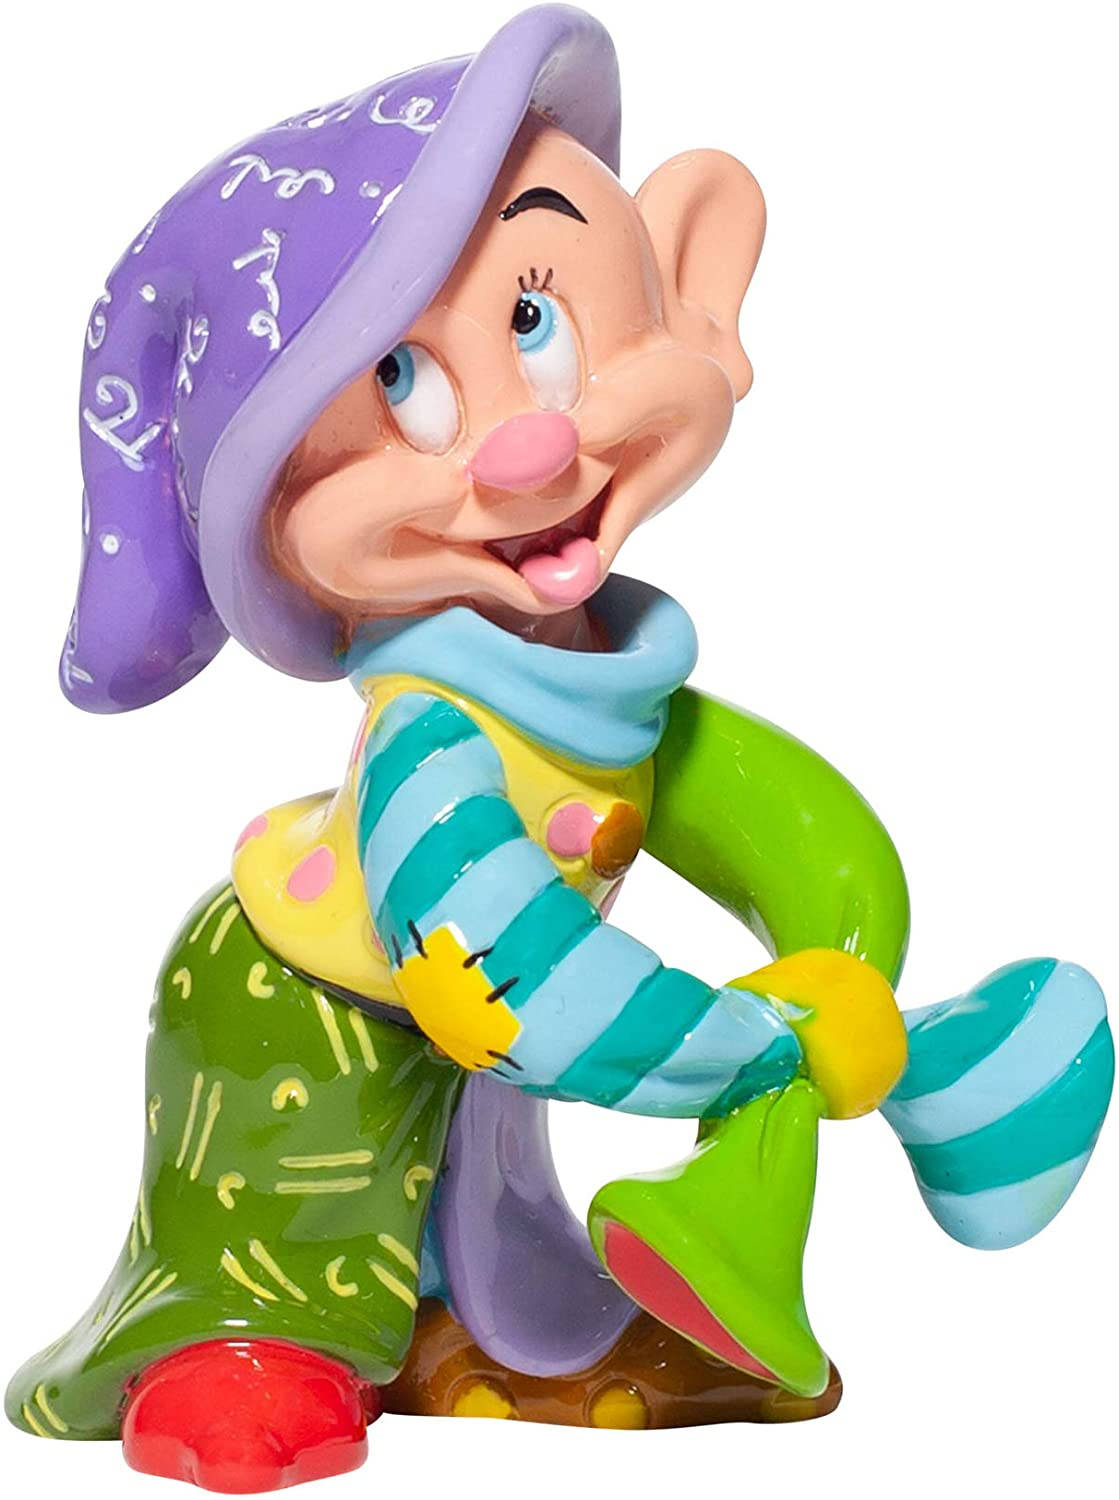 A Playful Statue Of Dopey Dwarf From Disney's Snow White Background